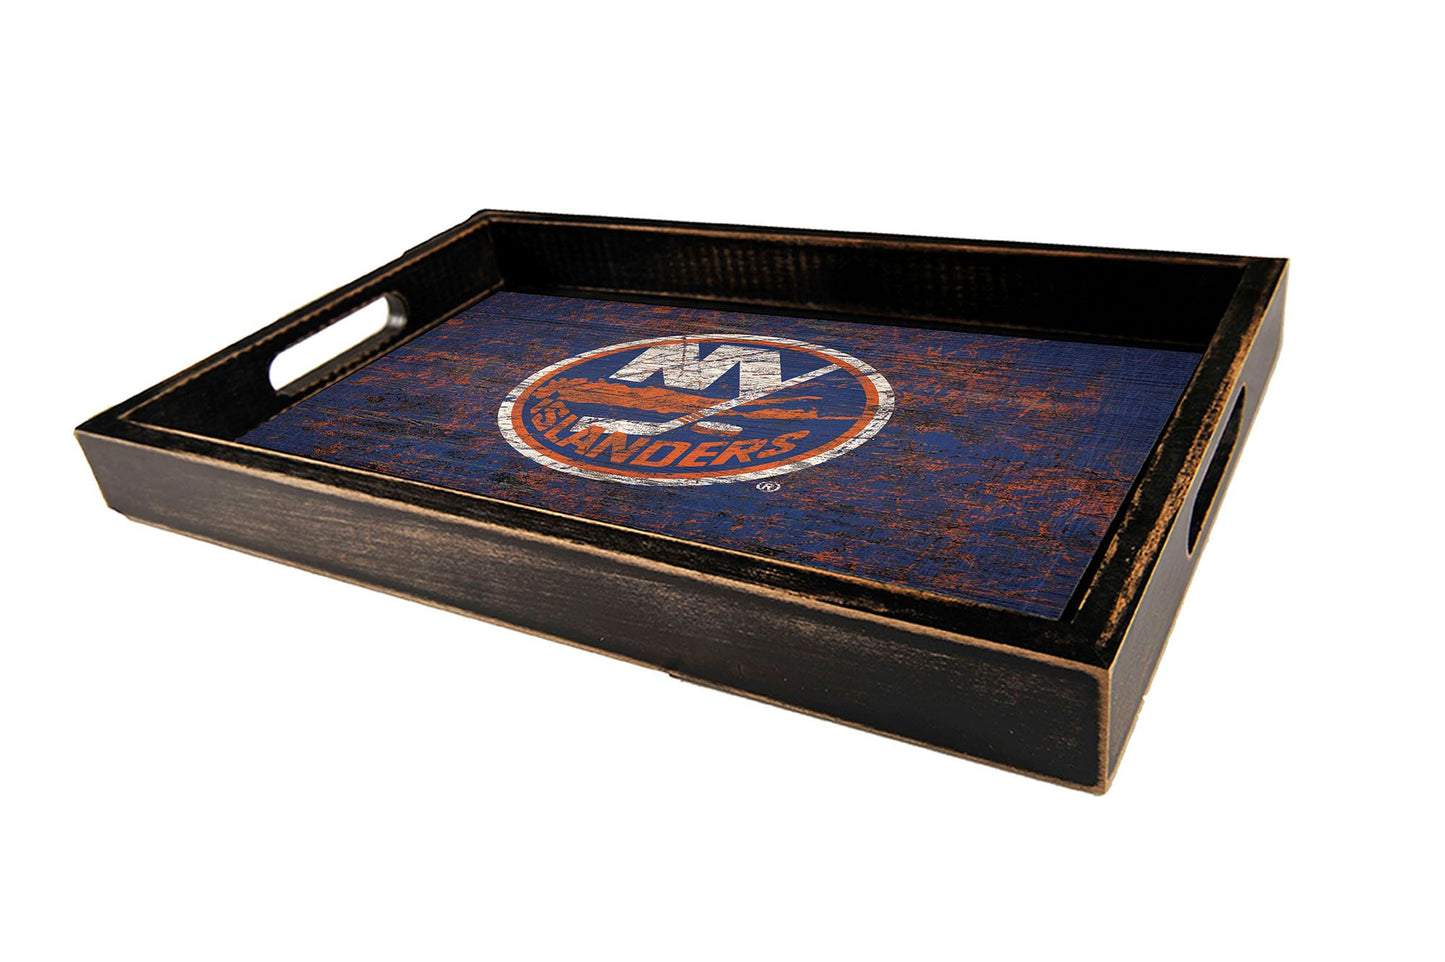 New York Islanders Distressed Serving Tray with Team Color by Fan Creations